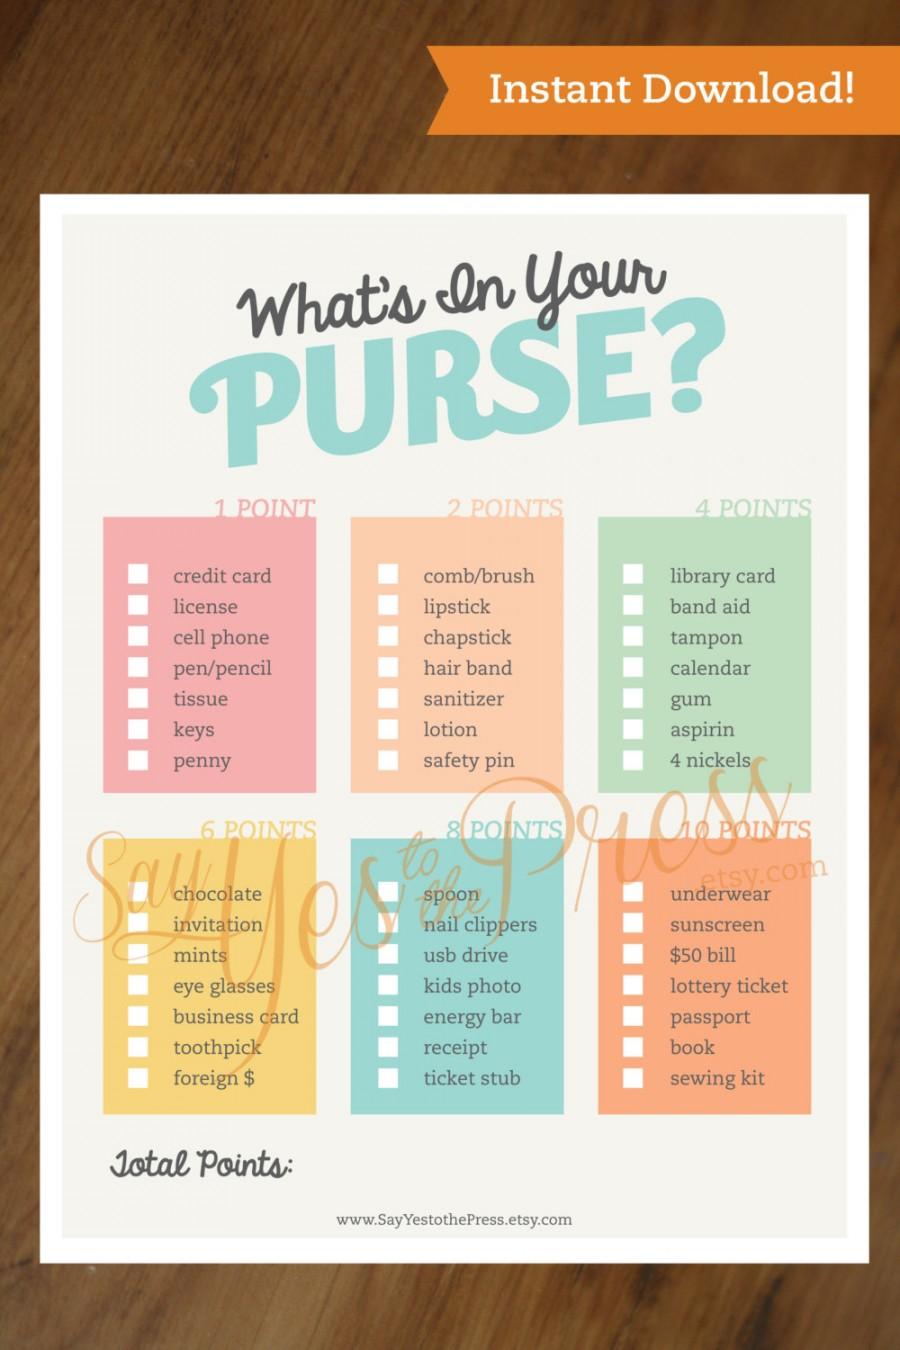 Wedding - WHATS in YOUR PURSE? Instant Download Bridal Shower Game